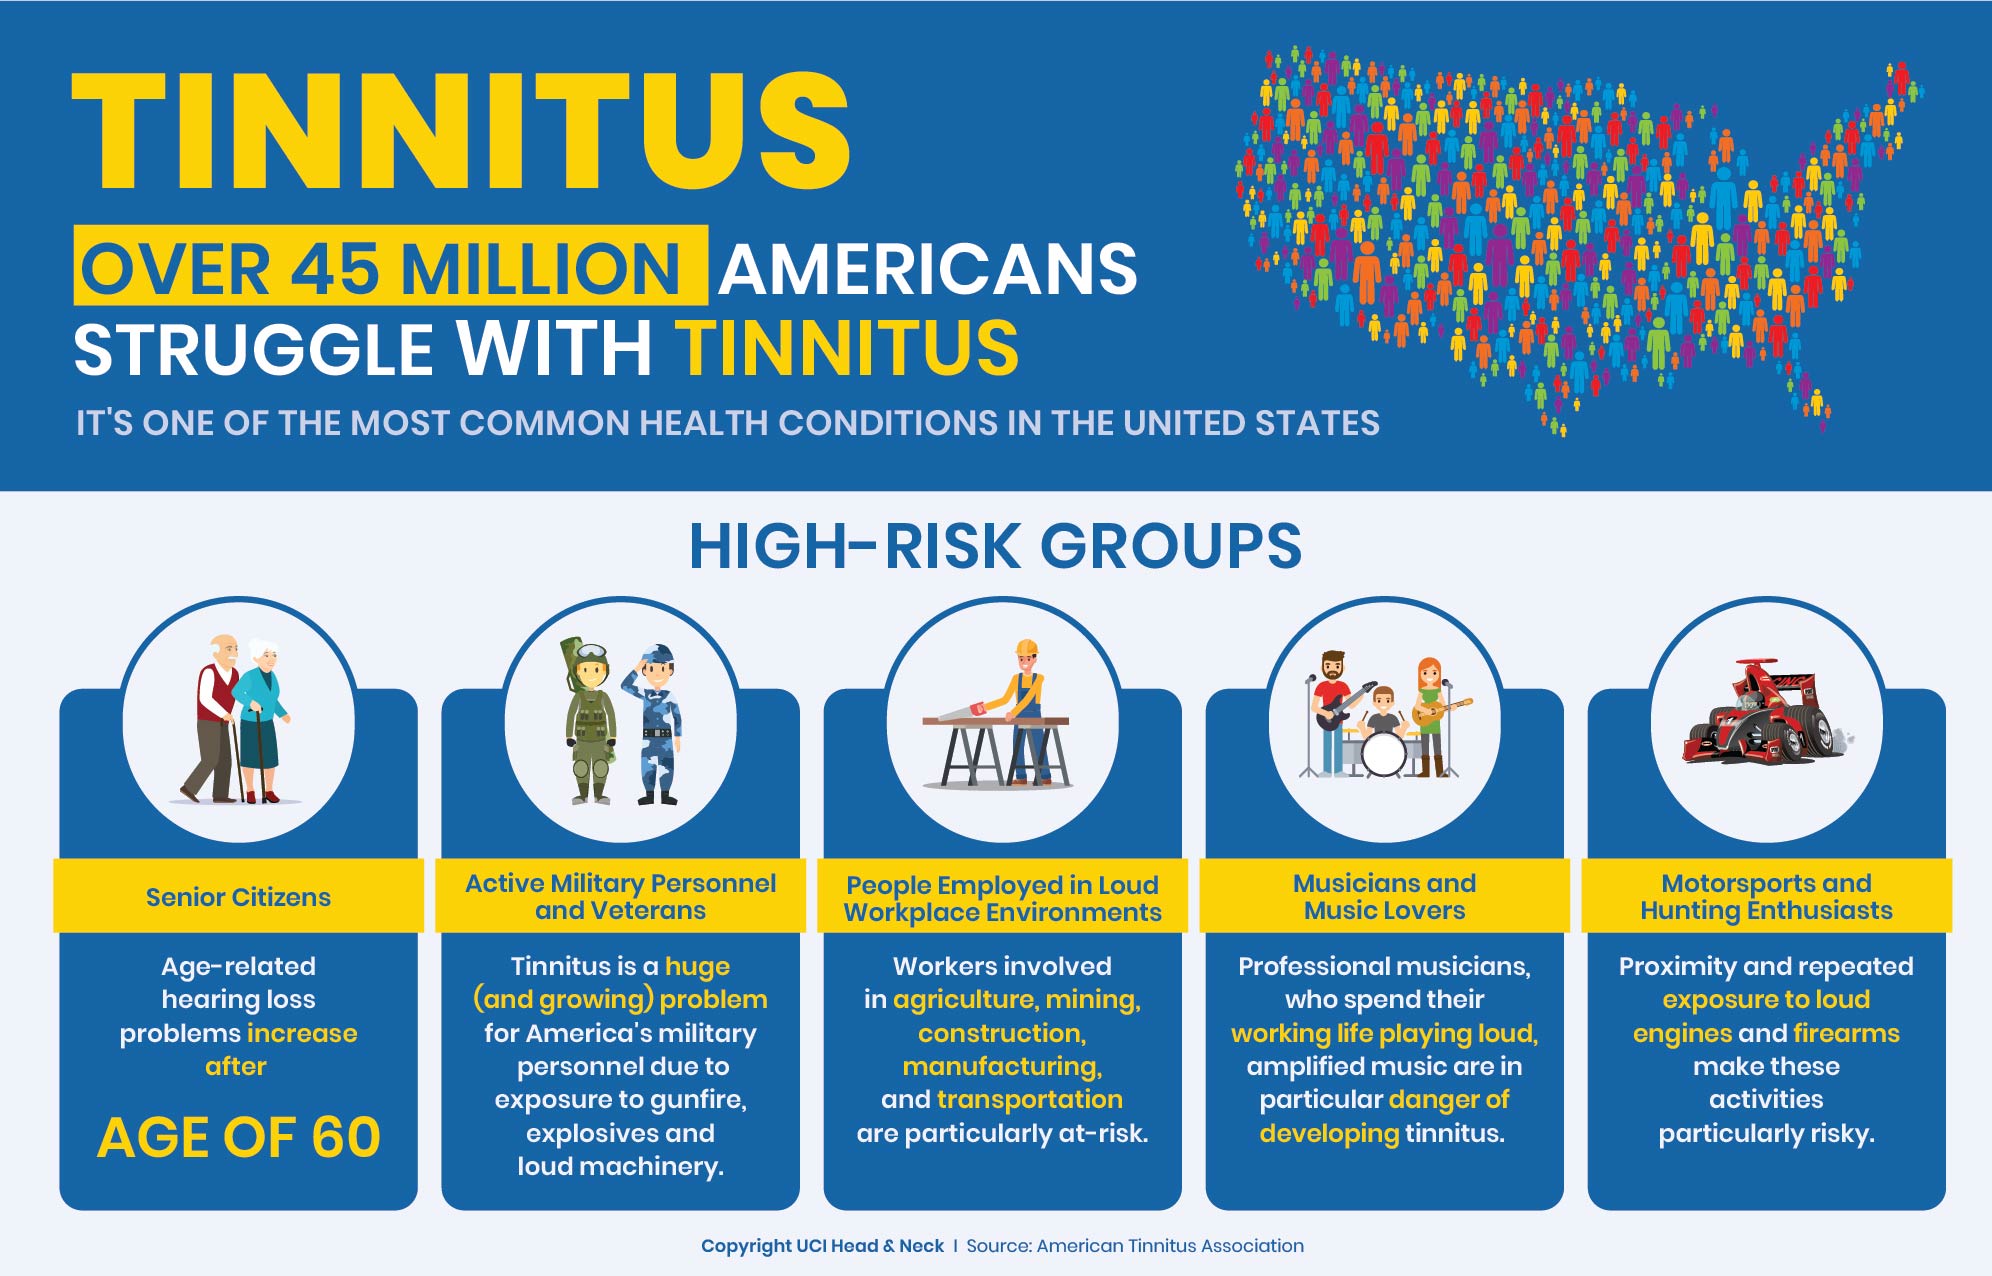 tinnitus causes - an infographic showing the highest risk groups